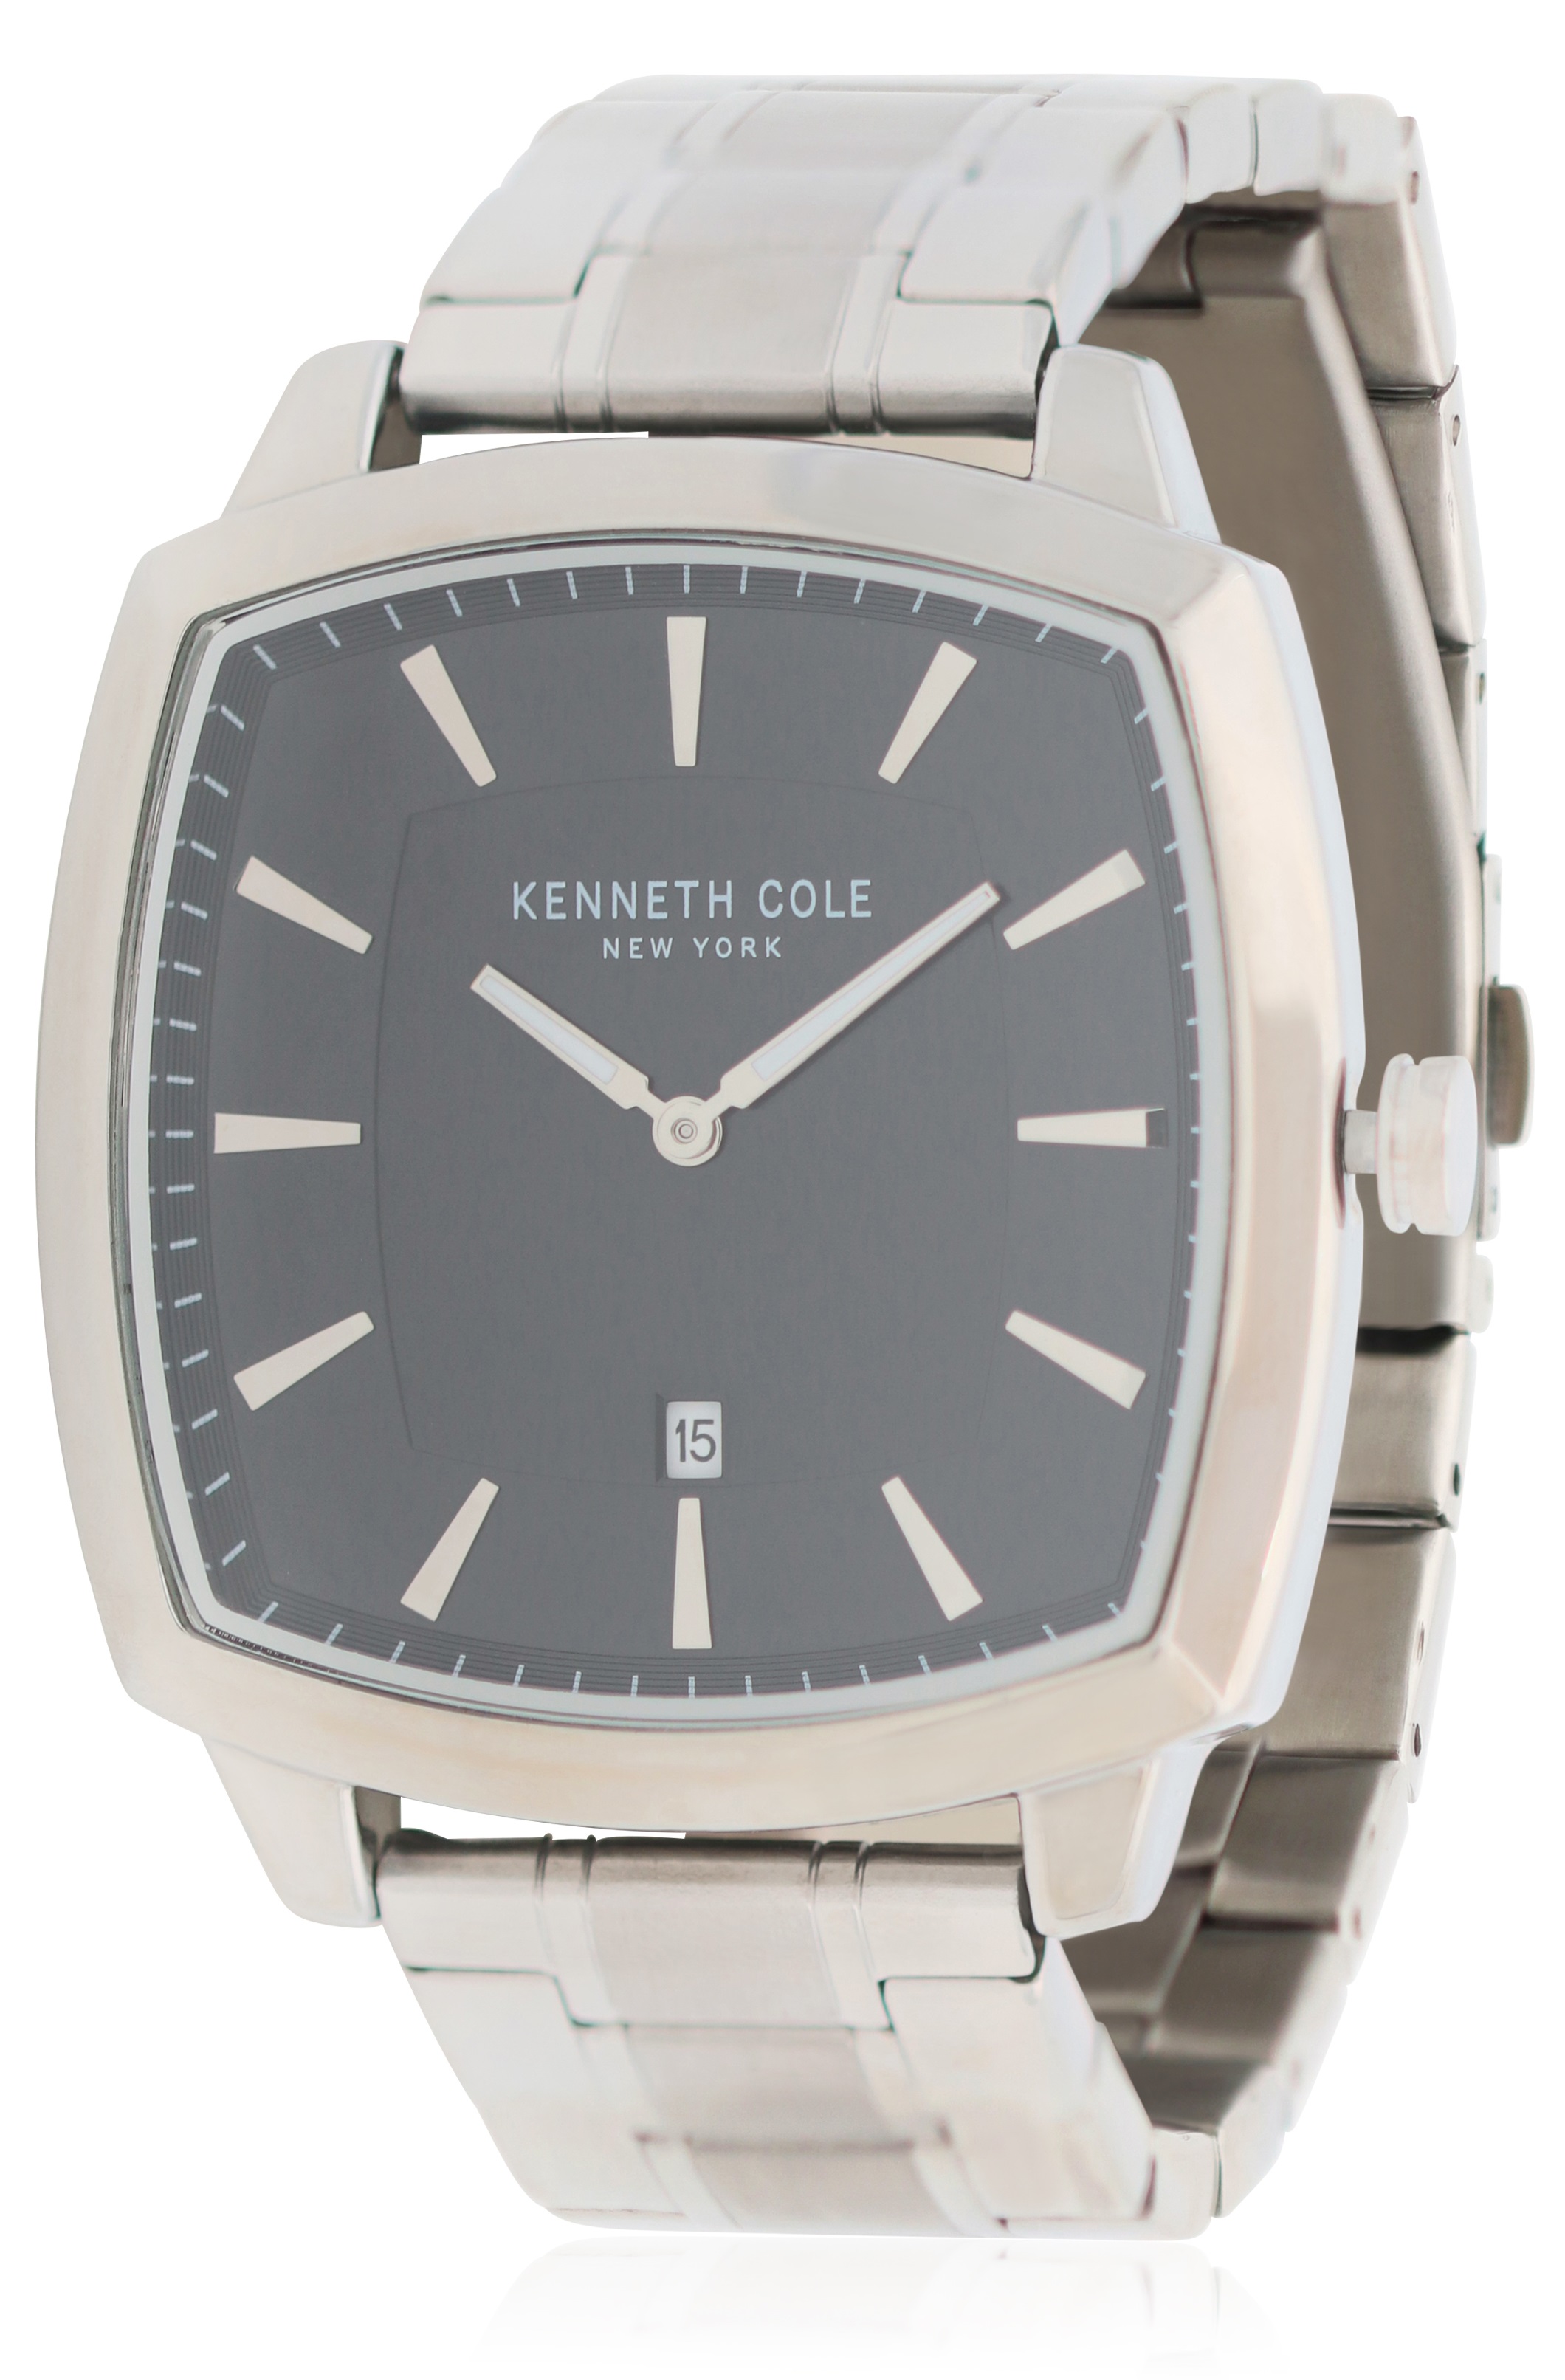 Kenneth Cole Stainless Steel Mens Watch KC50525006 | eBay Kenneth Cole Stainless Steel Watch